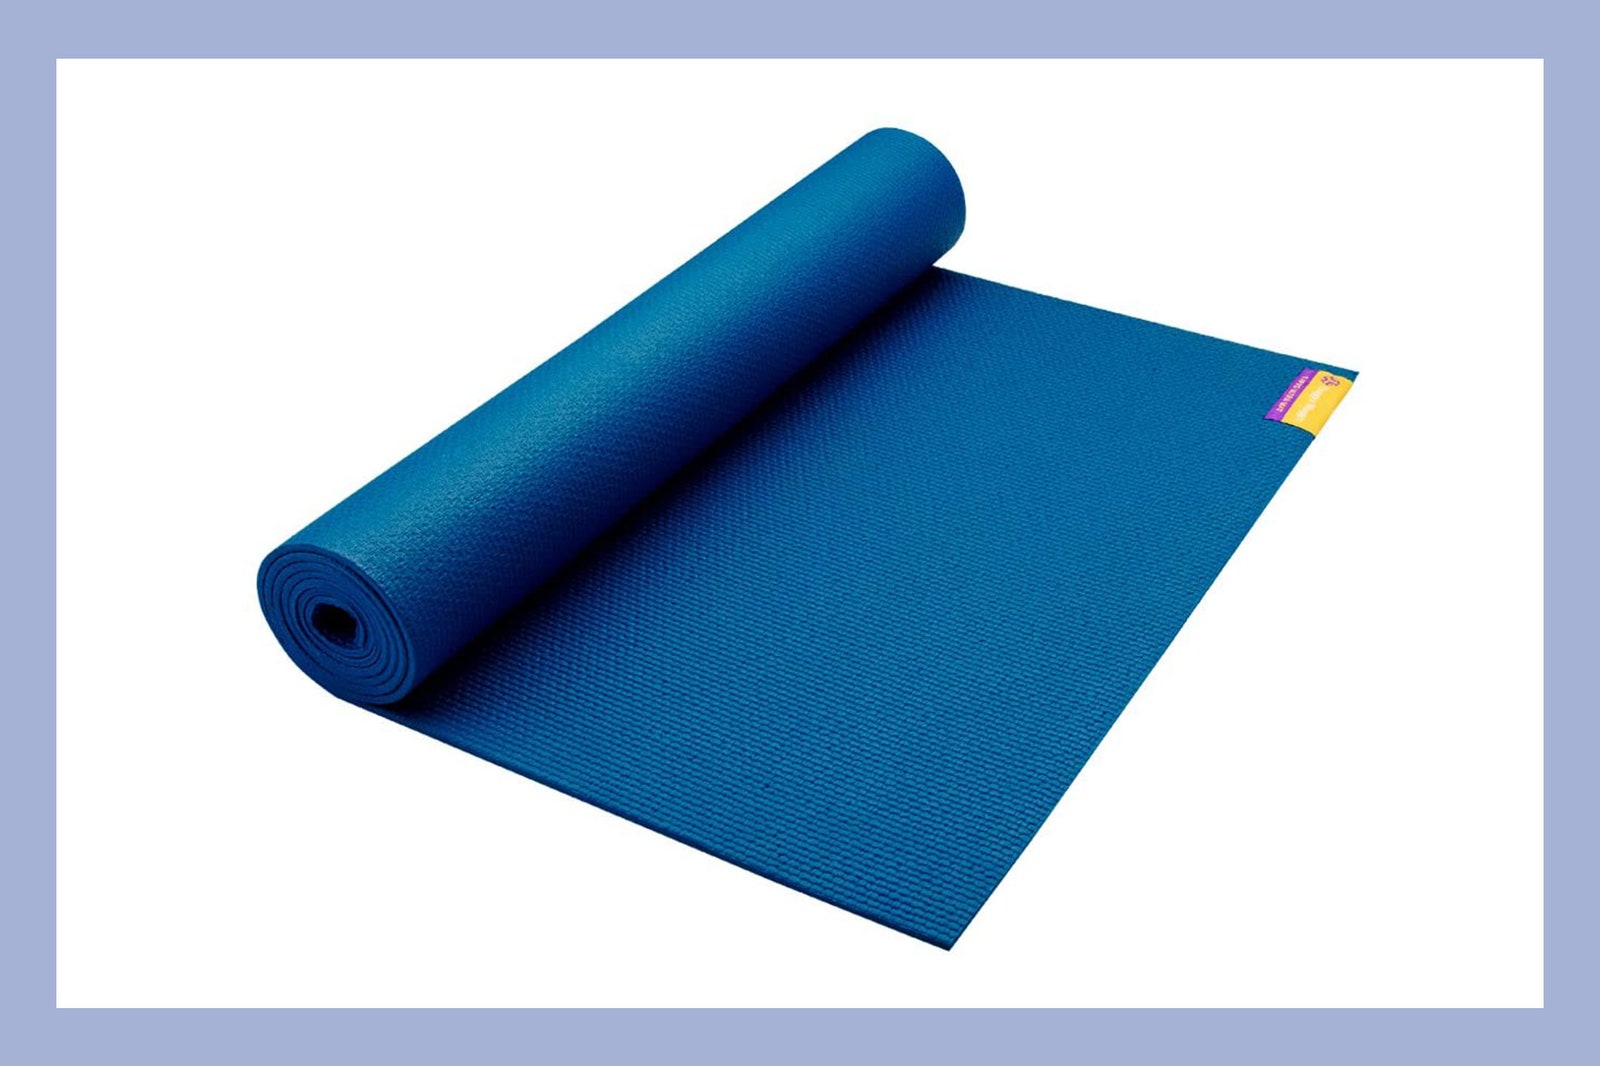 Yoga Exercise Coverings For Convenience And Warmth